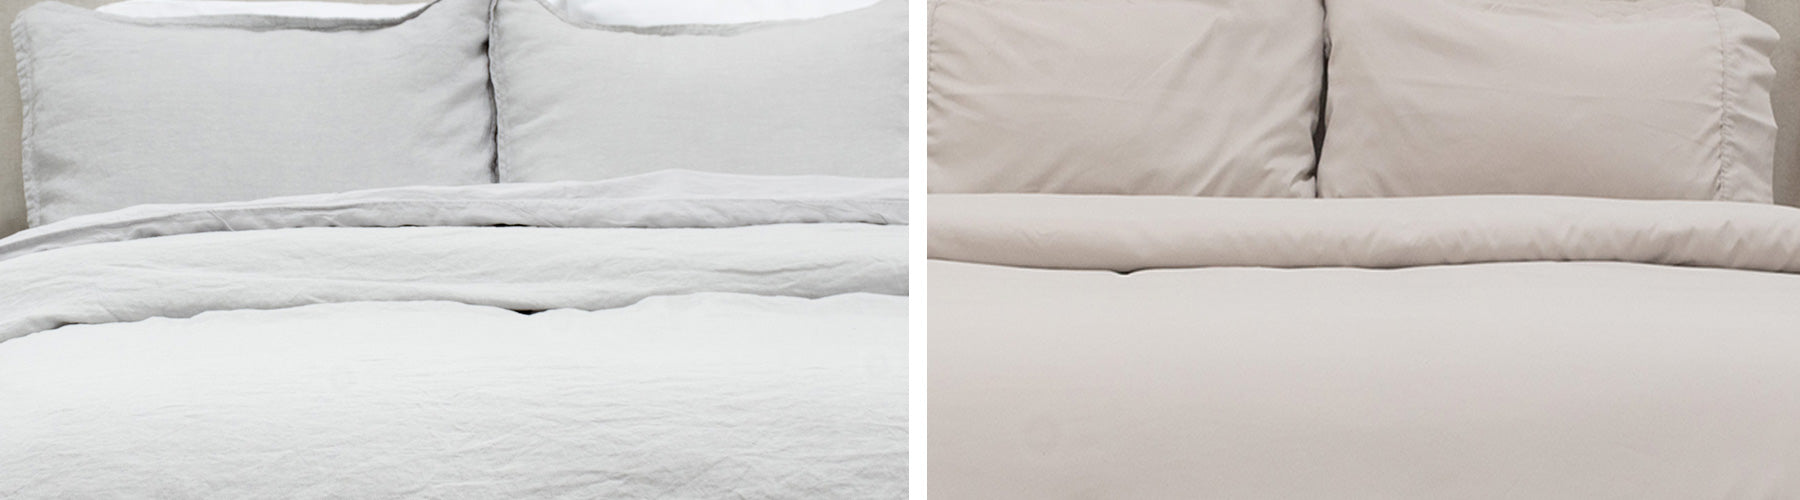 The Best Type of Cleaning Cloth: Microfiber vs. Organic Cotton vs